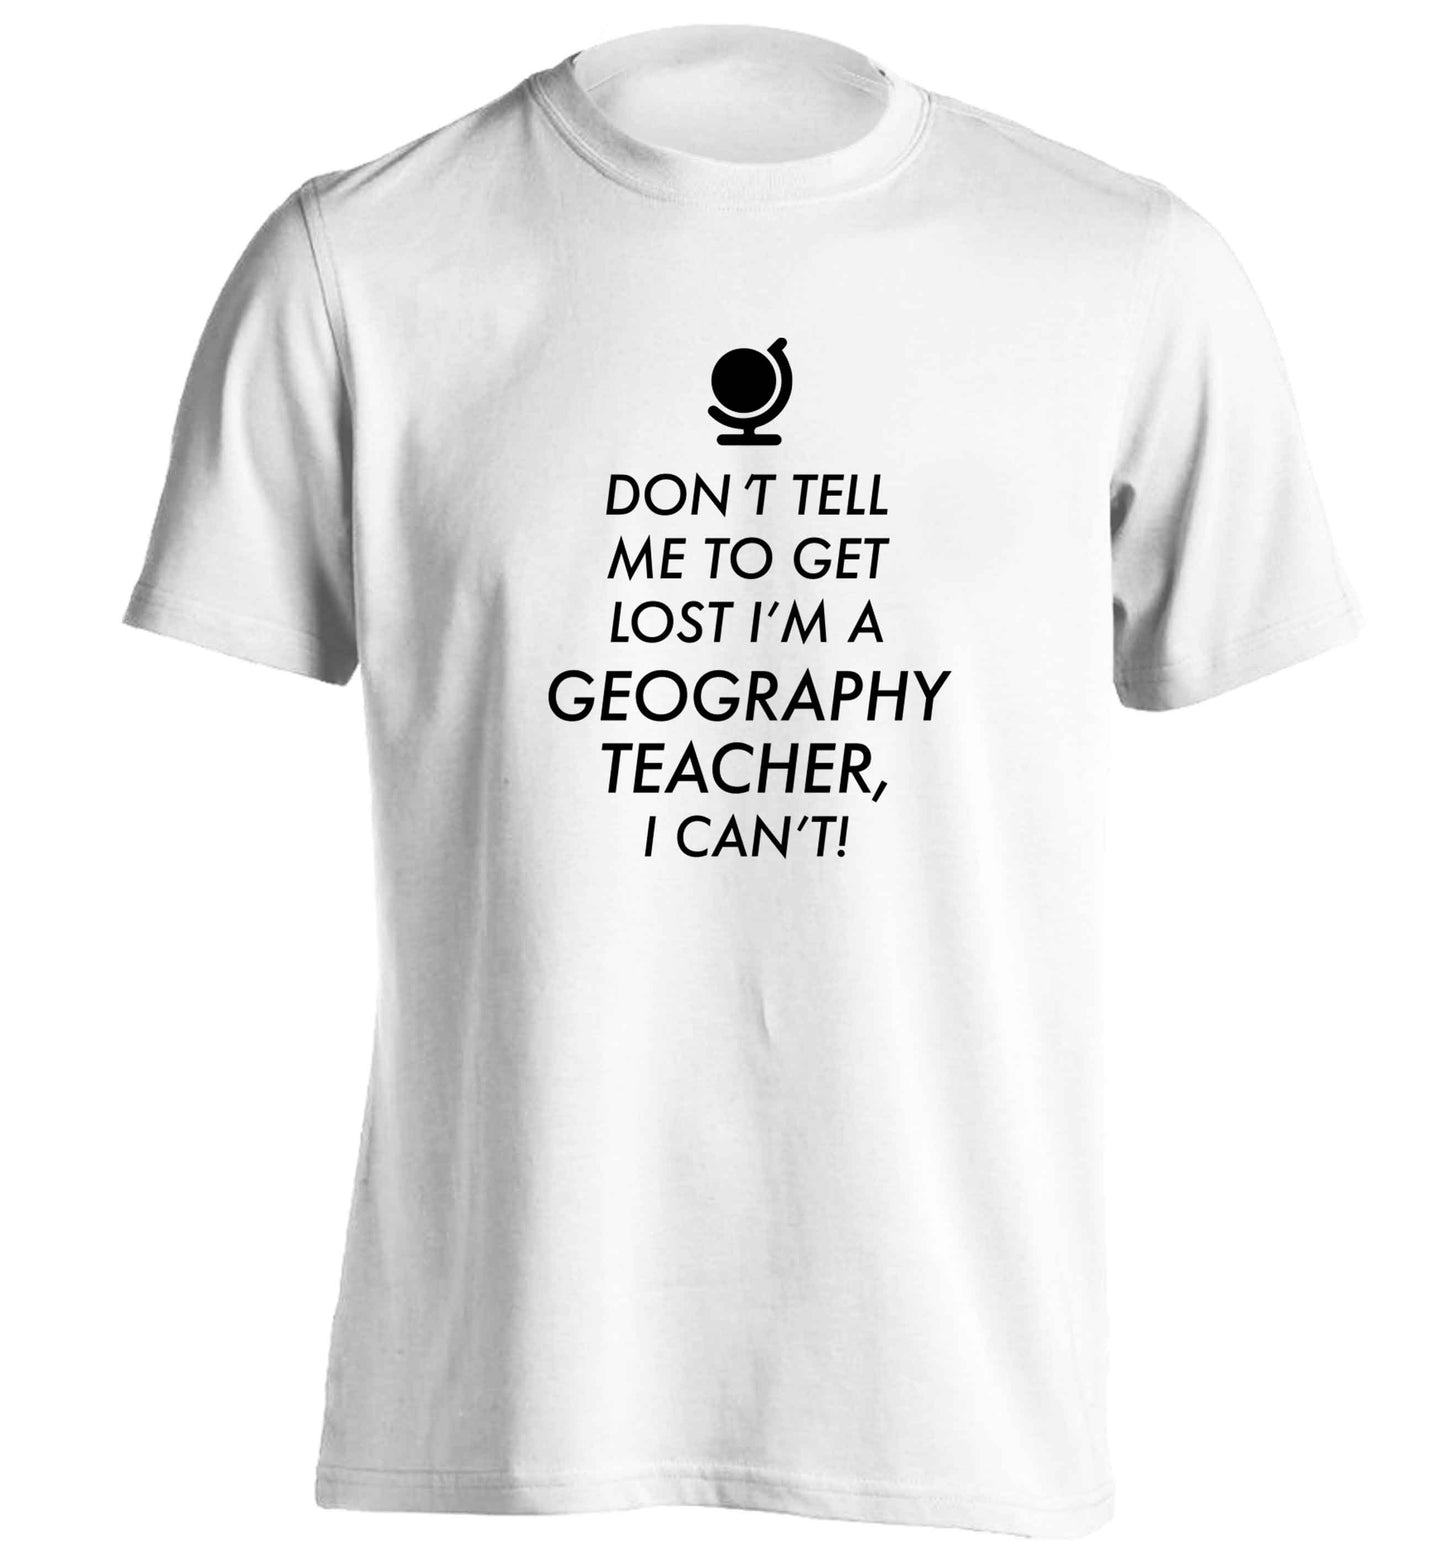 Don't tell me to get lost I'm a geography teacher, I can't adults unisex white Tshirt 2XL